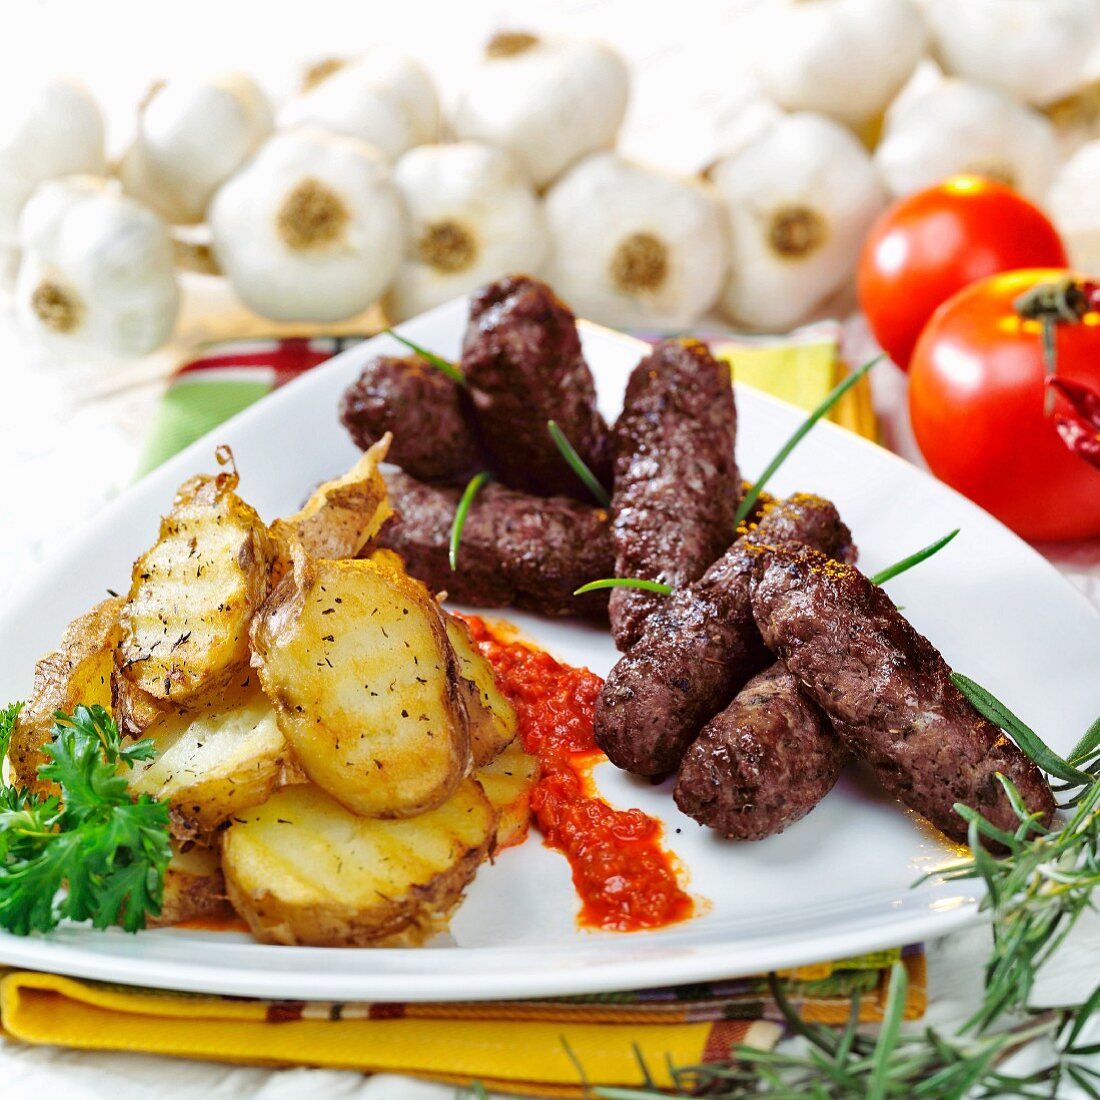 Cevapcici with grilled potato slices